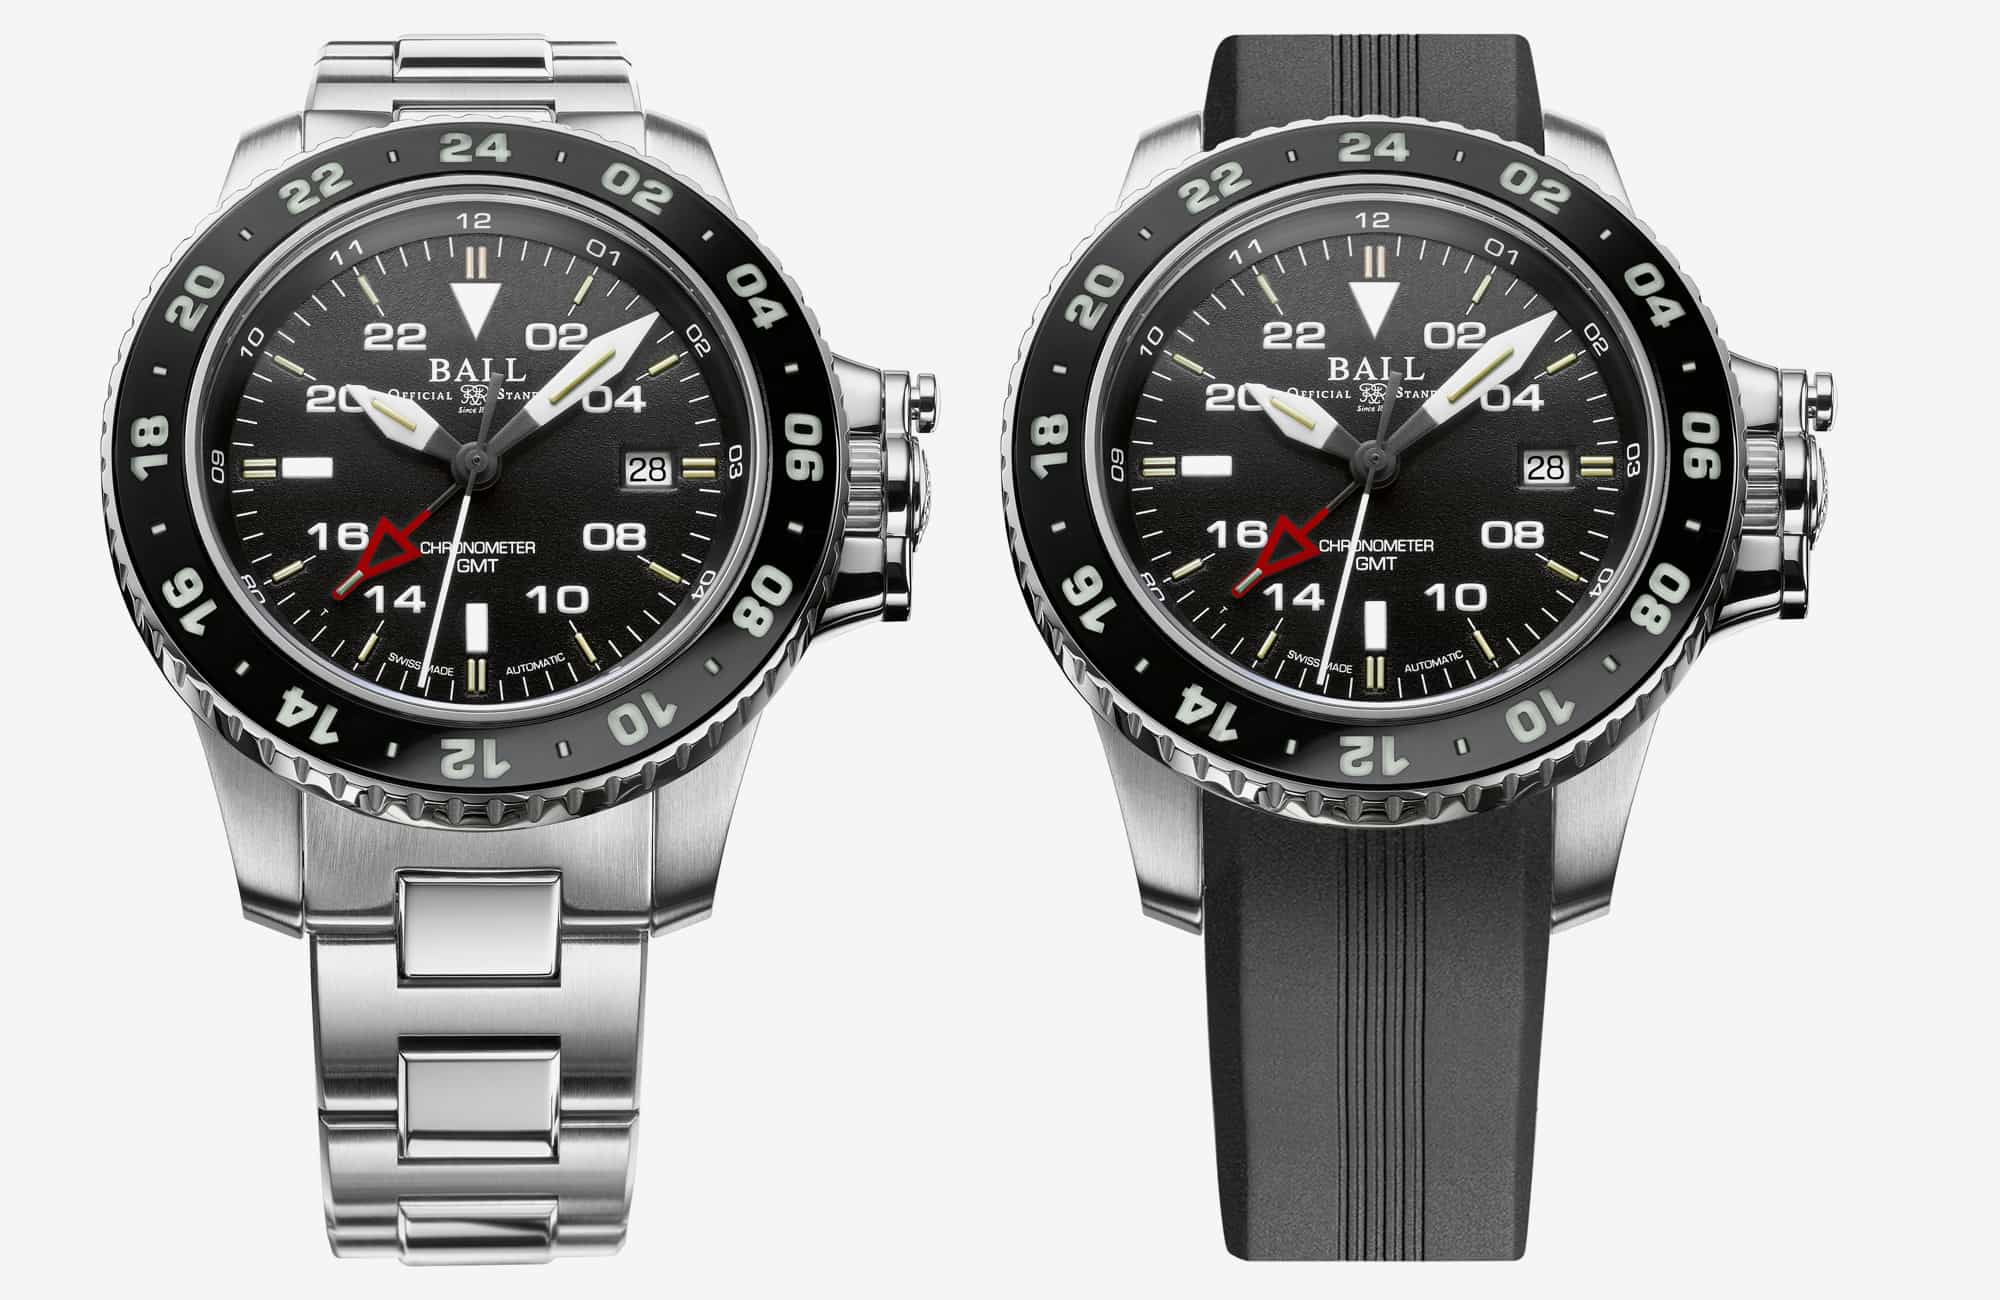 Introducing the BALL Engineer Hydrocarbon AeroGMT II, Available Now for a Special Pre-Order Price